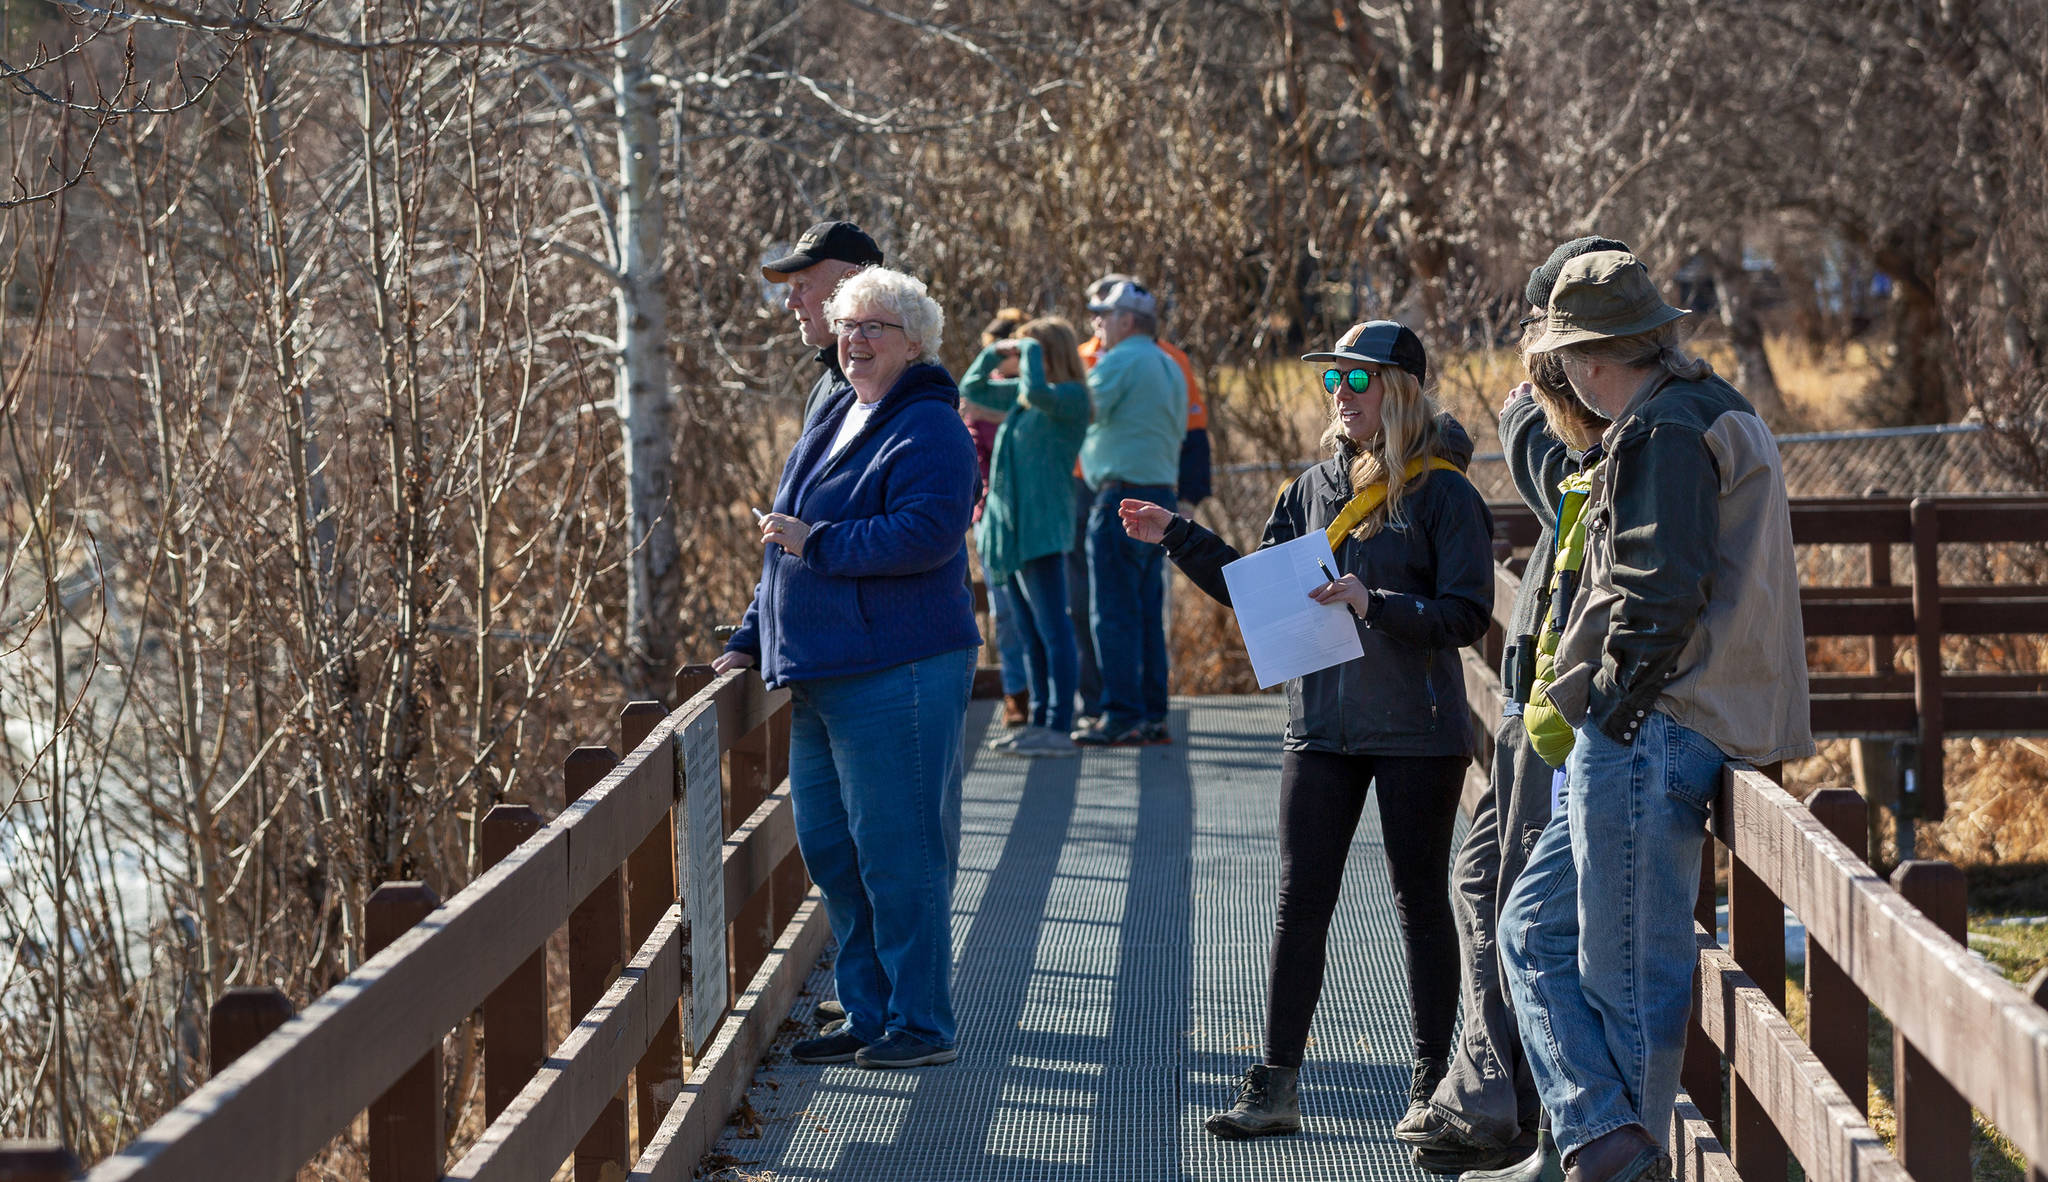 Beluga researcher Kim Ovitz (center, with sunglasses) and a group of volunteer whale-watchers look for belugas in the Kenai River on April 14, 2018 at Cunningham Park in Kenai, Alaska. 11 signed-up volunteers and several more casual ones helped Ovitz with her observations, which began March 15 and will continue until May 31. Her preliminary results suggest that a large portion of Cook Inlet’s estimated 328 belugas travel the Kenai River with the tides in early spring. (Photo courtesy of Rickard Sjoeberg).